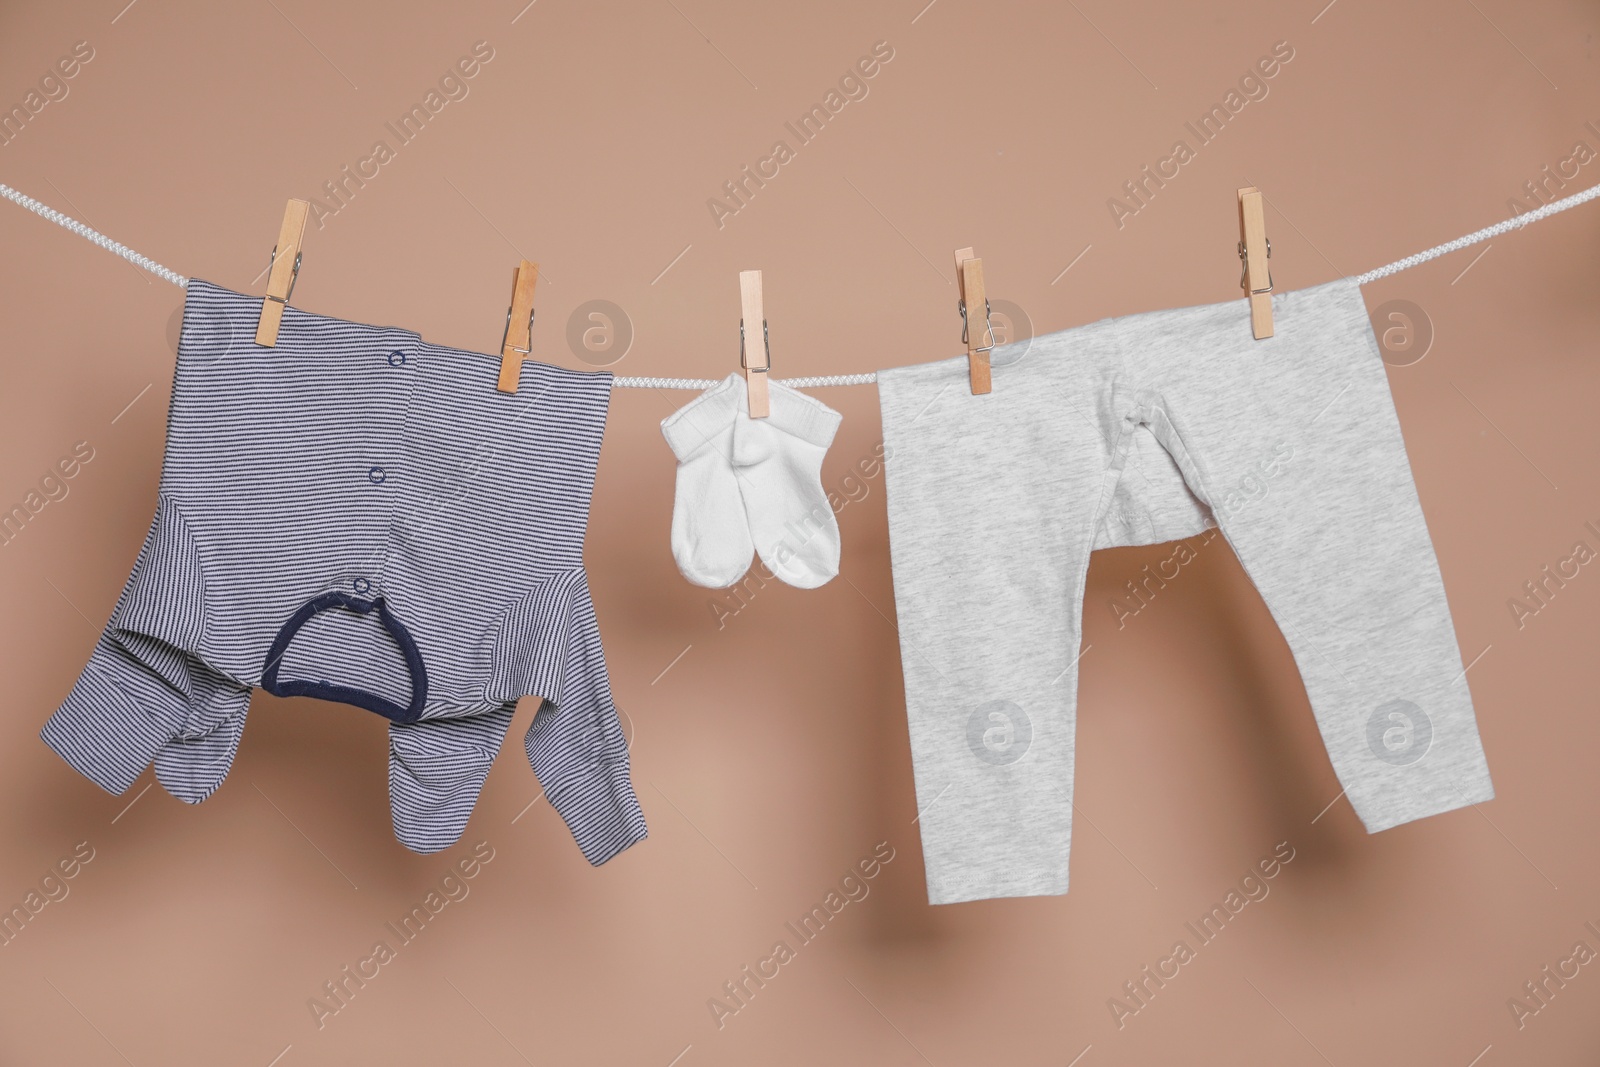 Photo of Cute small baby clothes hanging on washing line against brown background